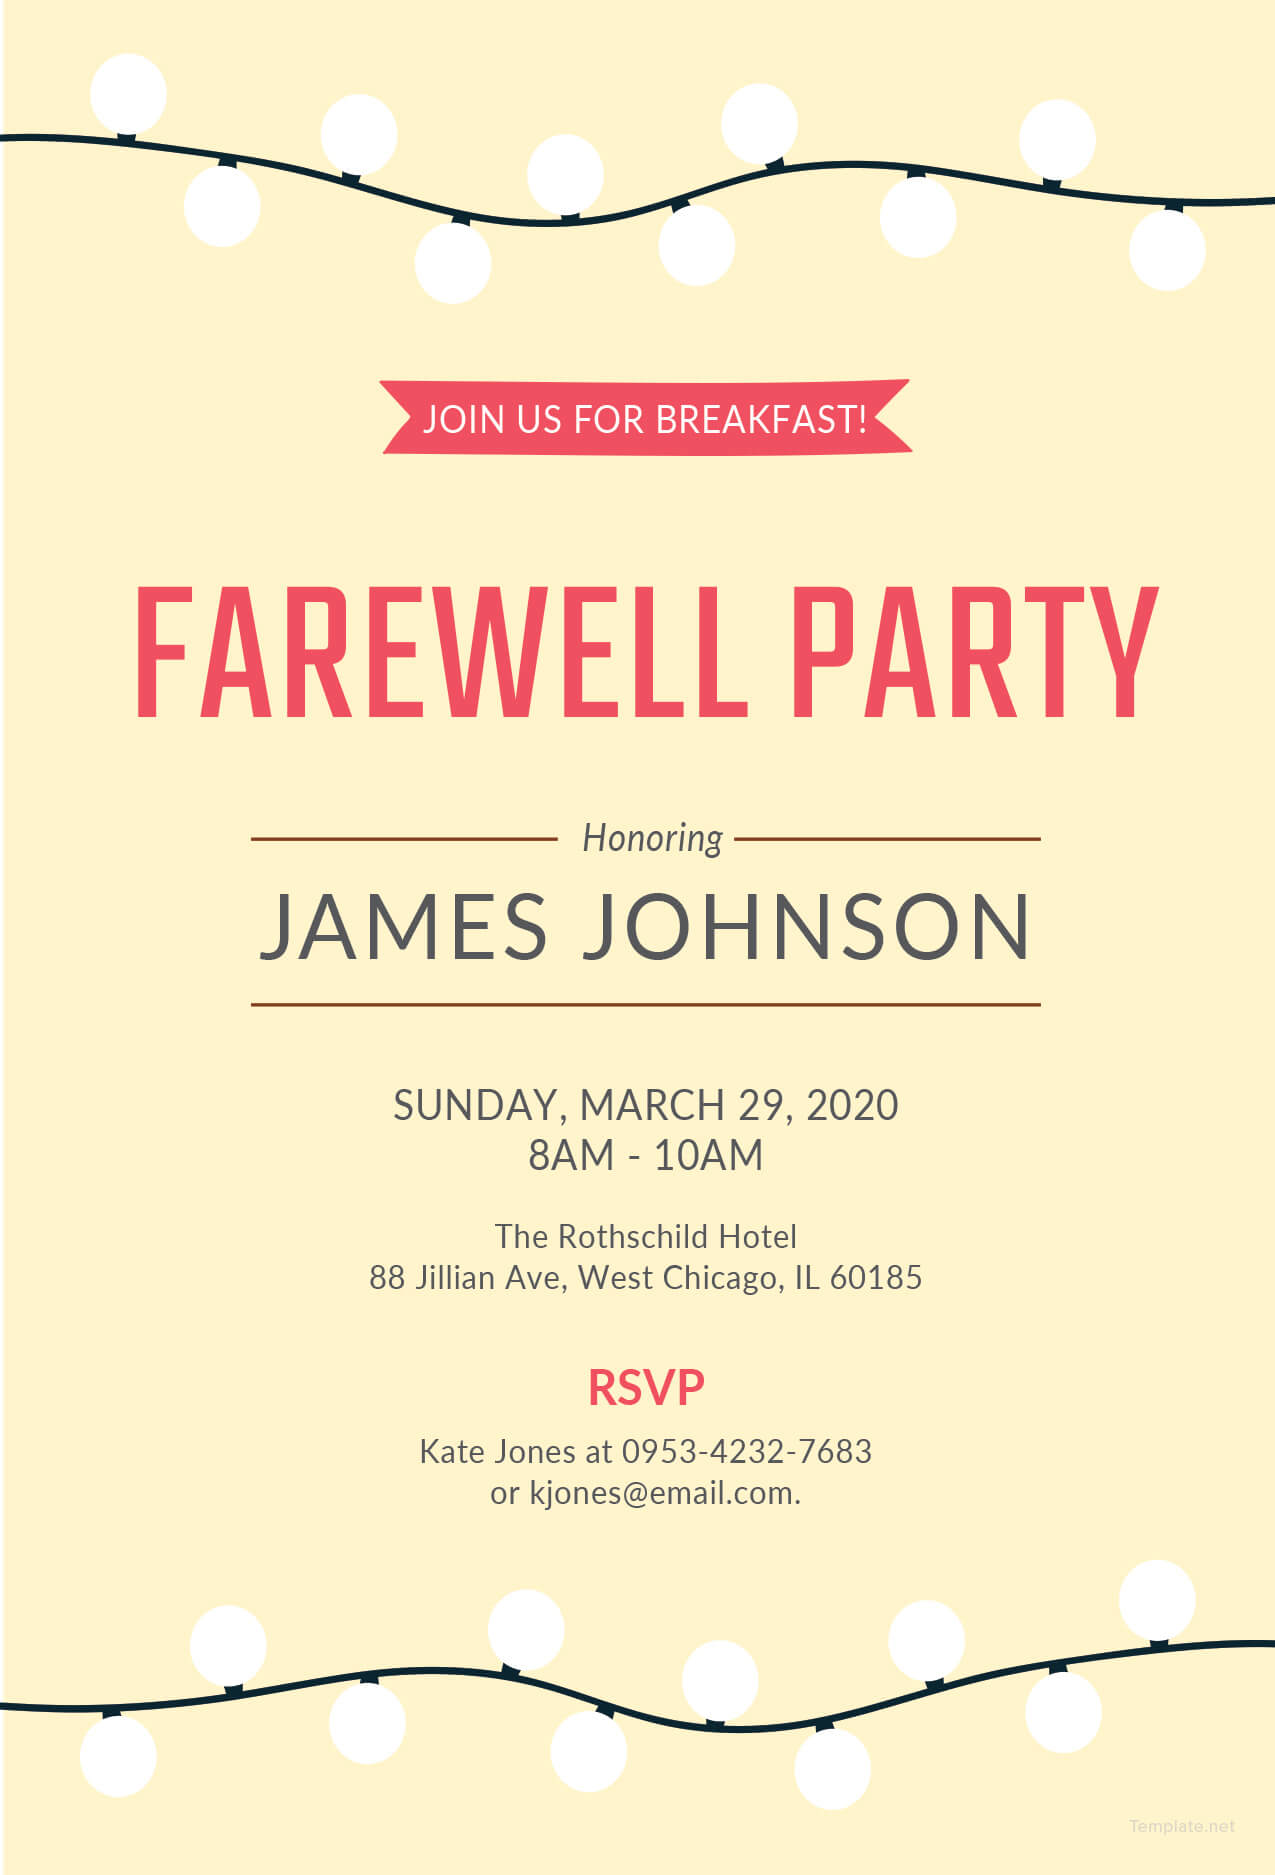 008 Farewellnvitations Templates Template Free Pertaining To Farewell Certificate Template